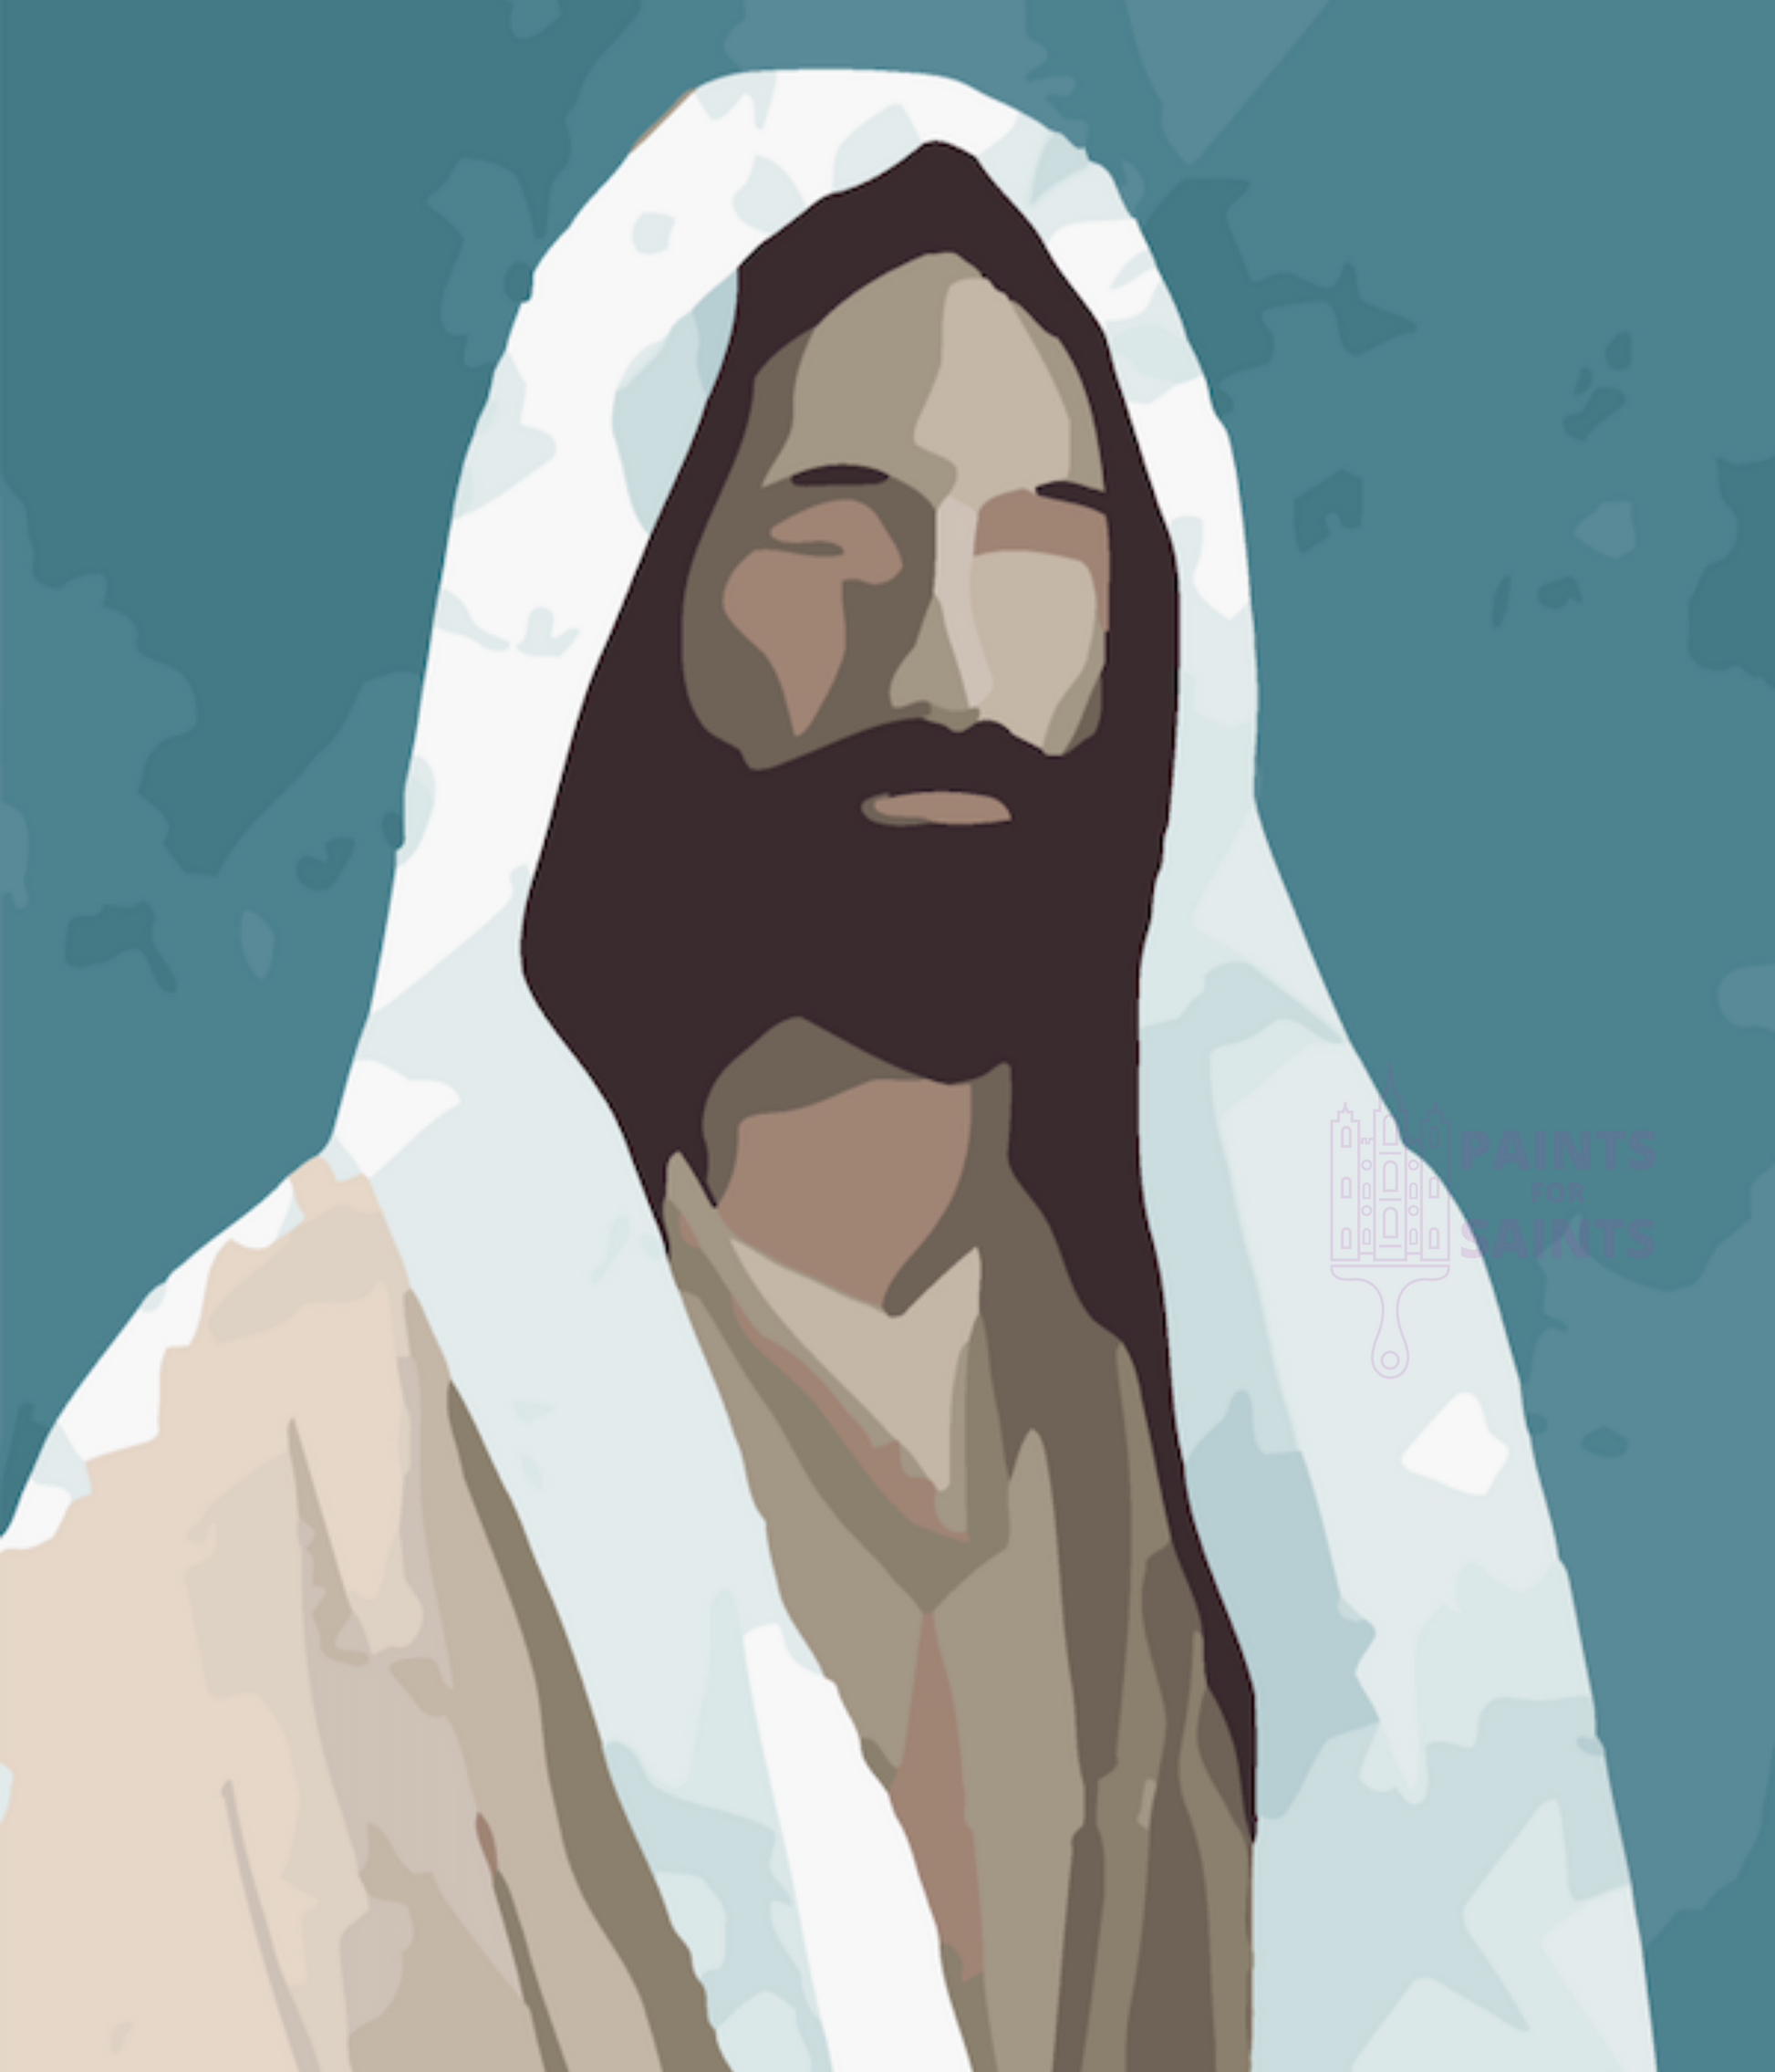 Christ at Gethsemane Paint By Numbers Kit – Psaints